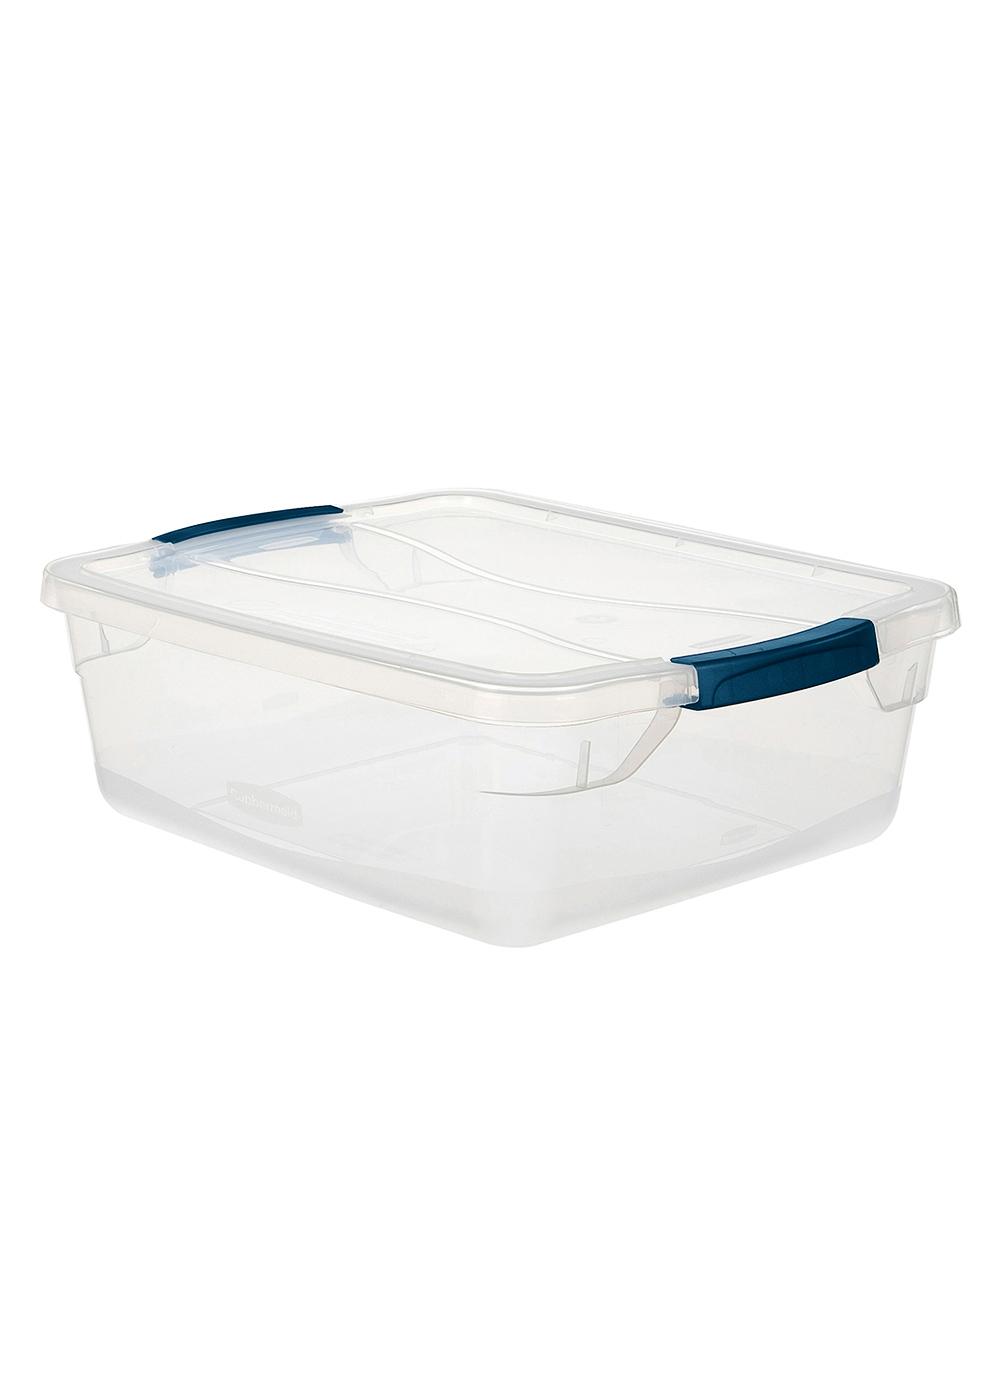 Rubbermaid Cleverstore Clear Latching Tote; image 1 of 3